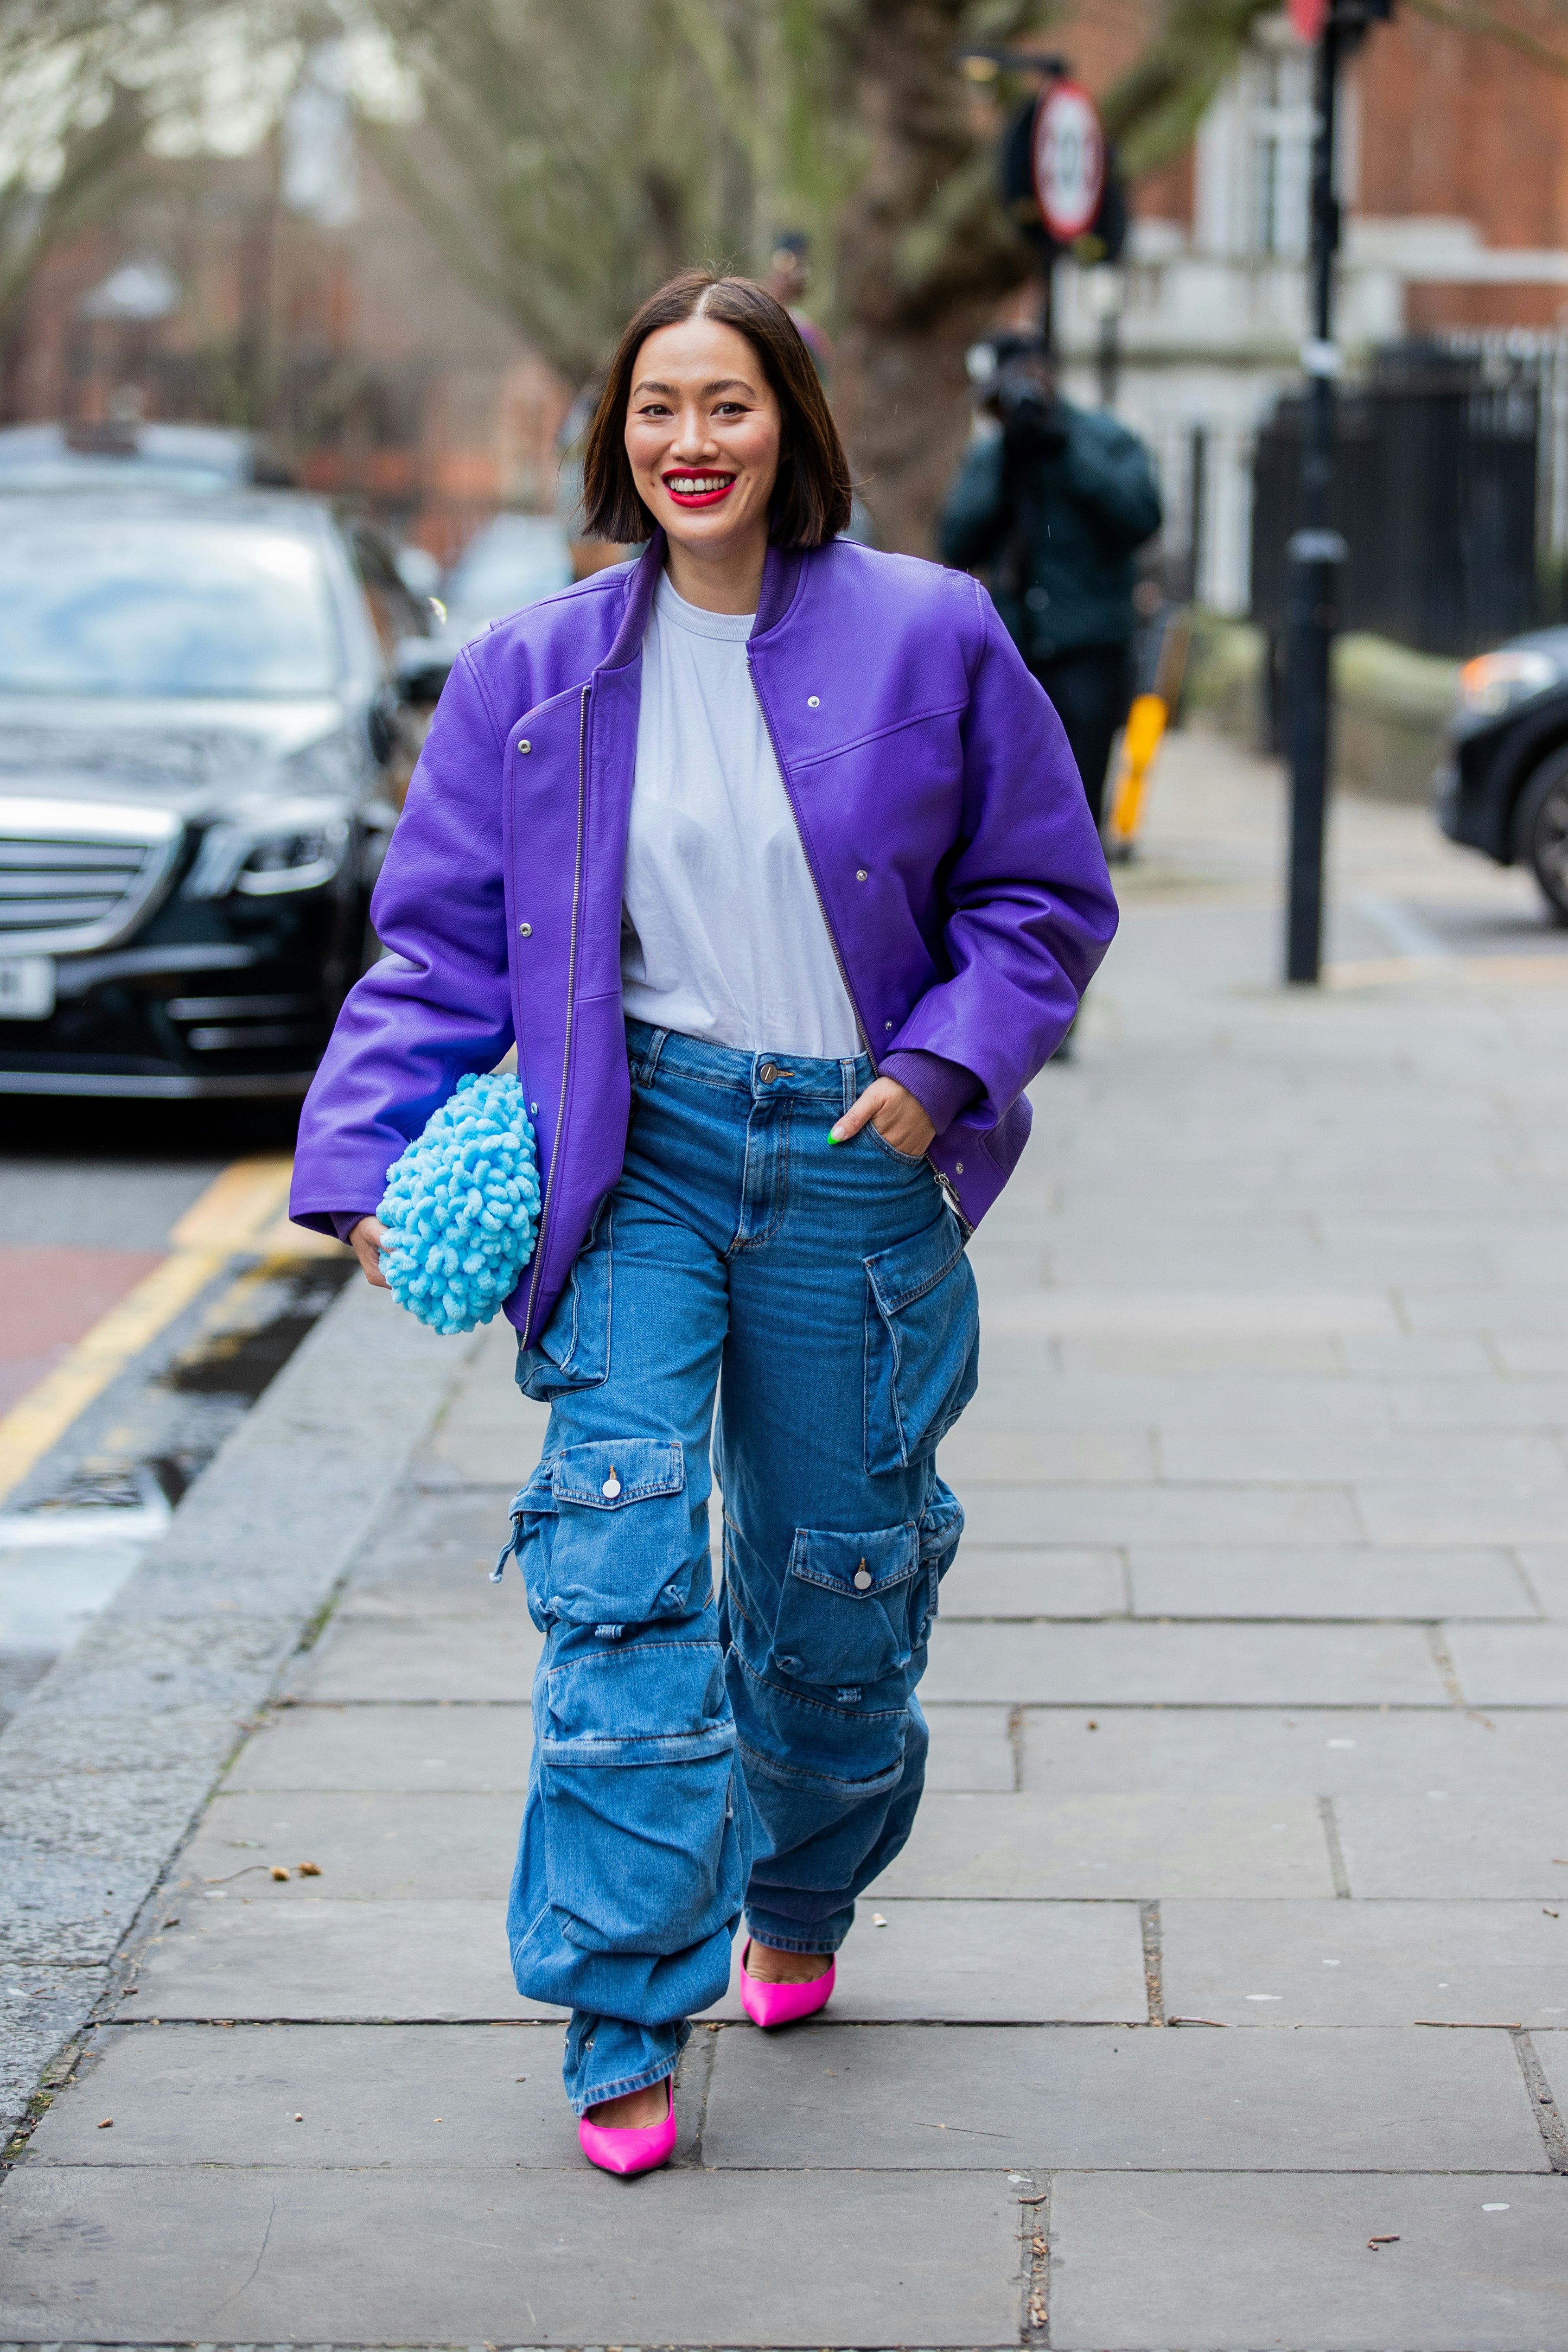 Cargo jeans: the denim trend fashion people will live in this Fall